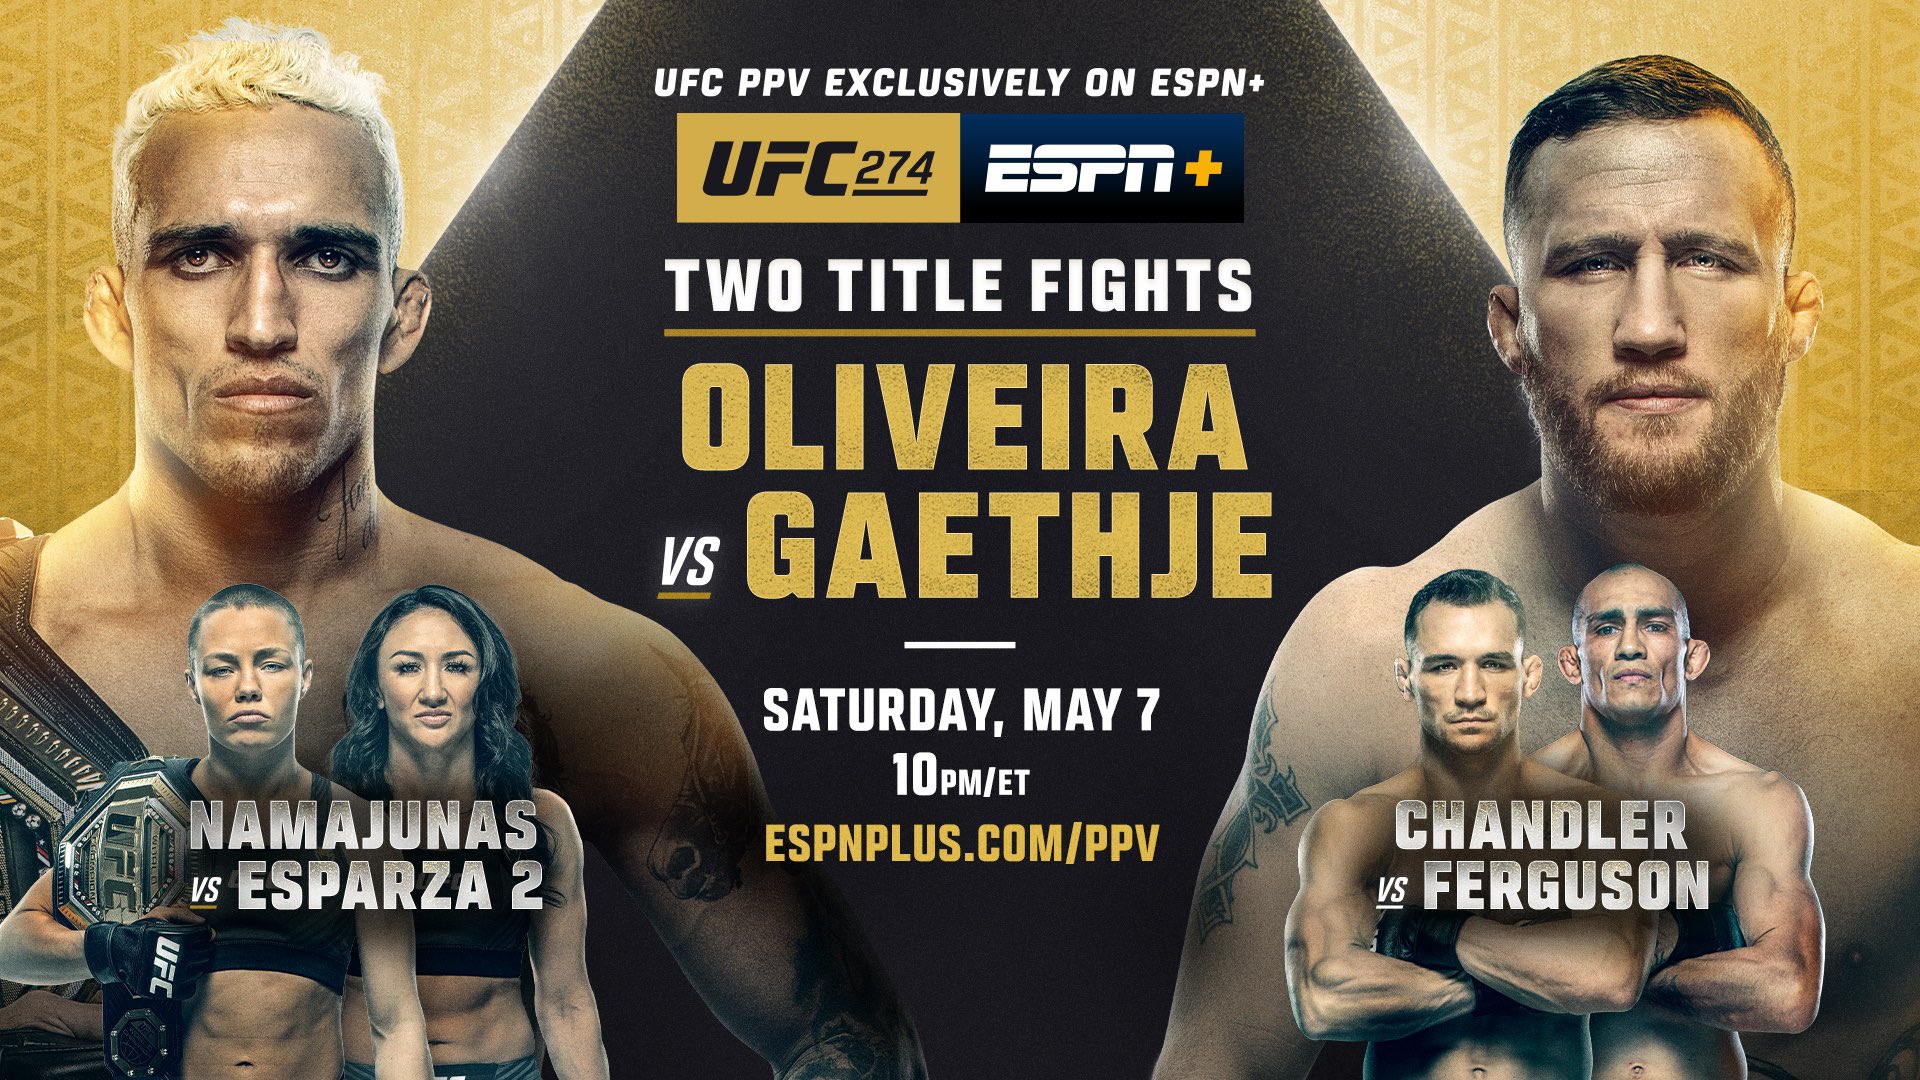 free links to watch the fight tonight